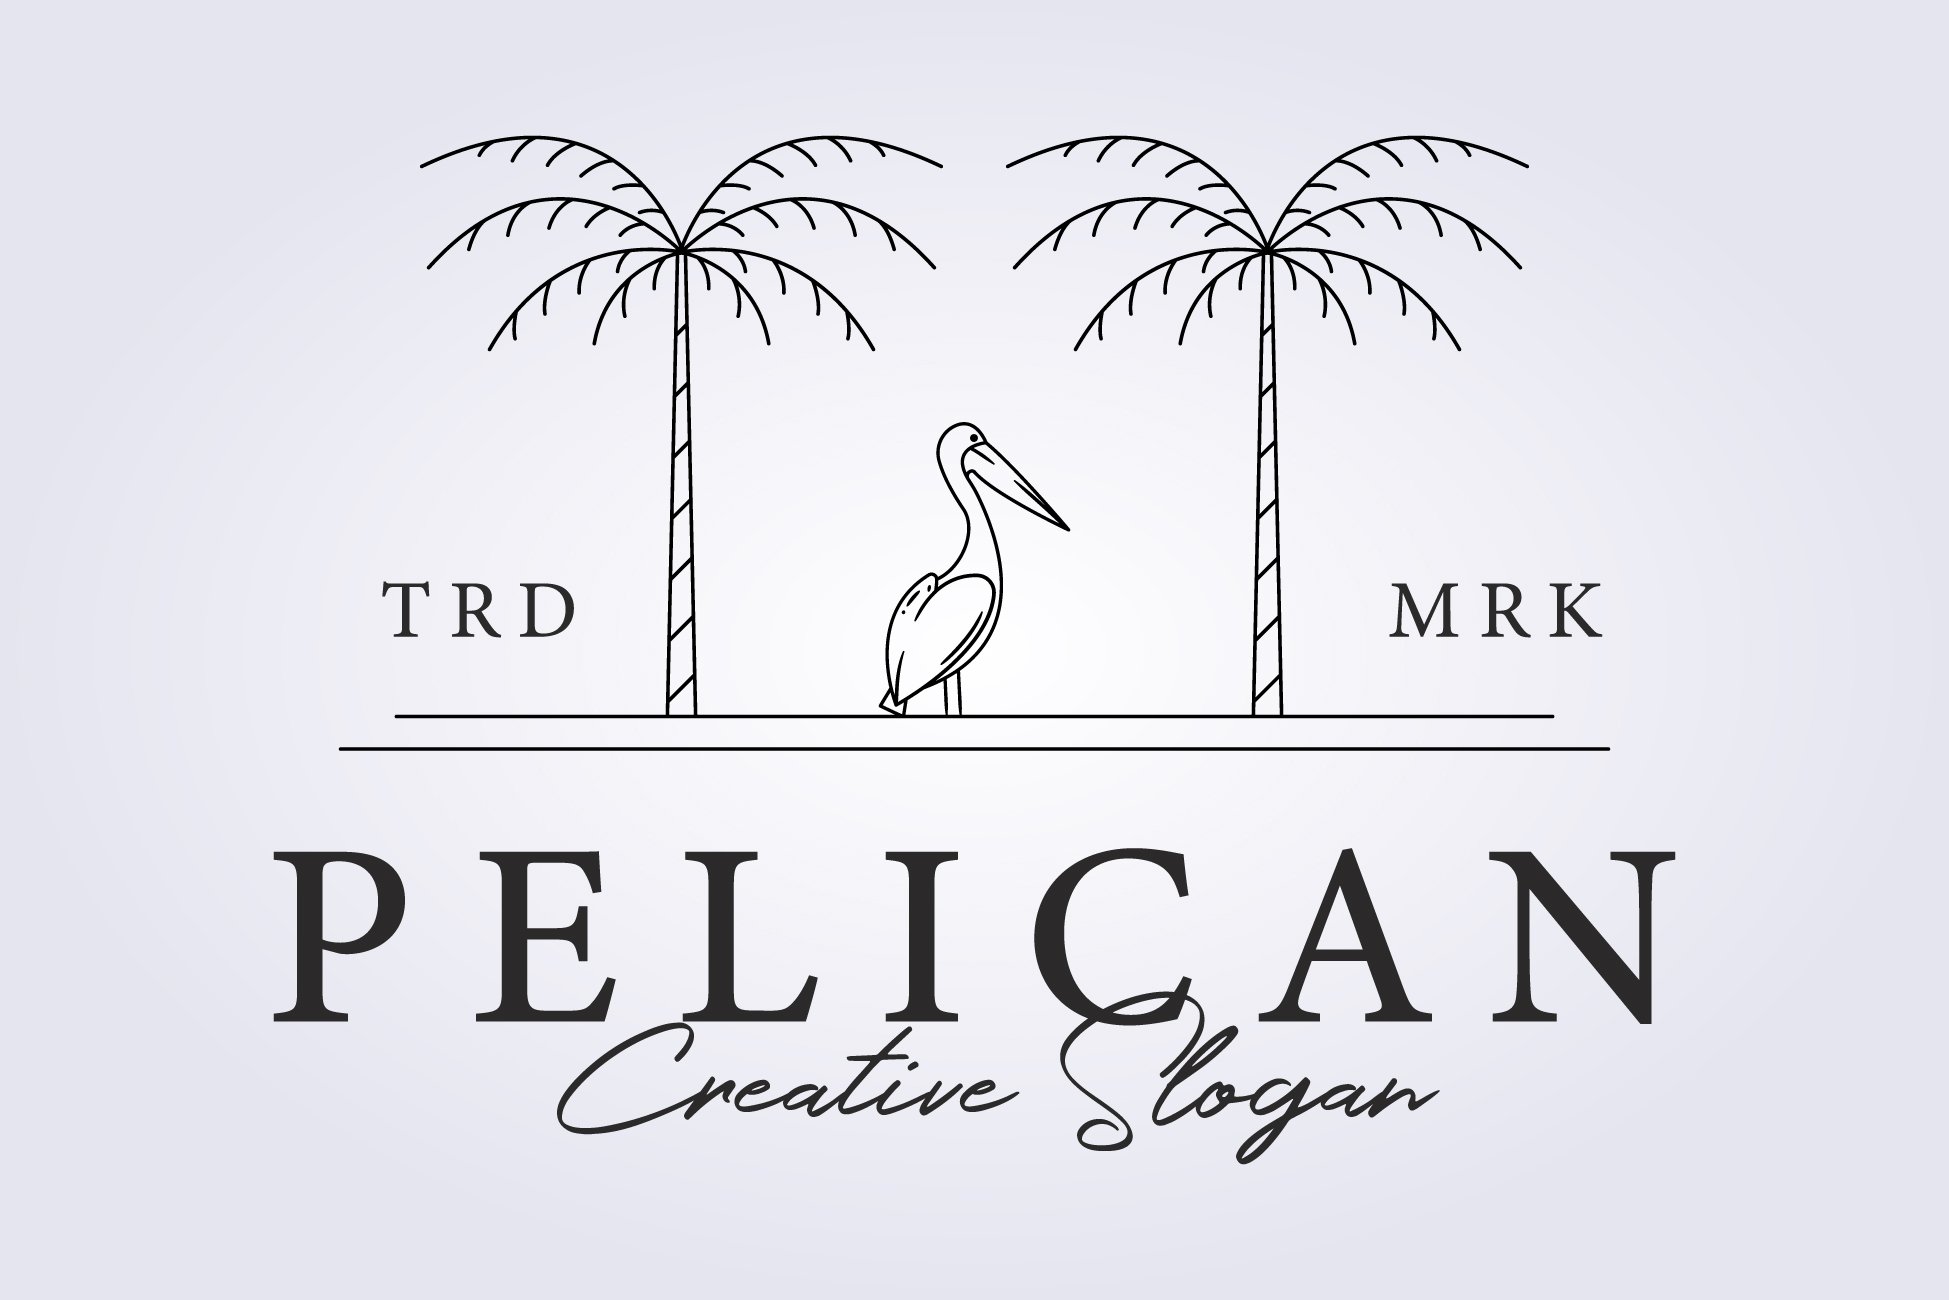 a pelican standing between the palm cover image.